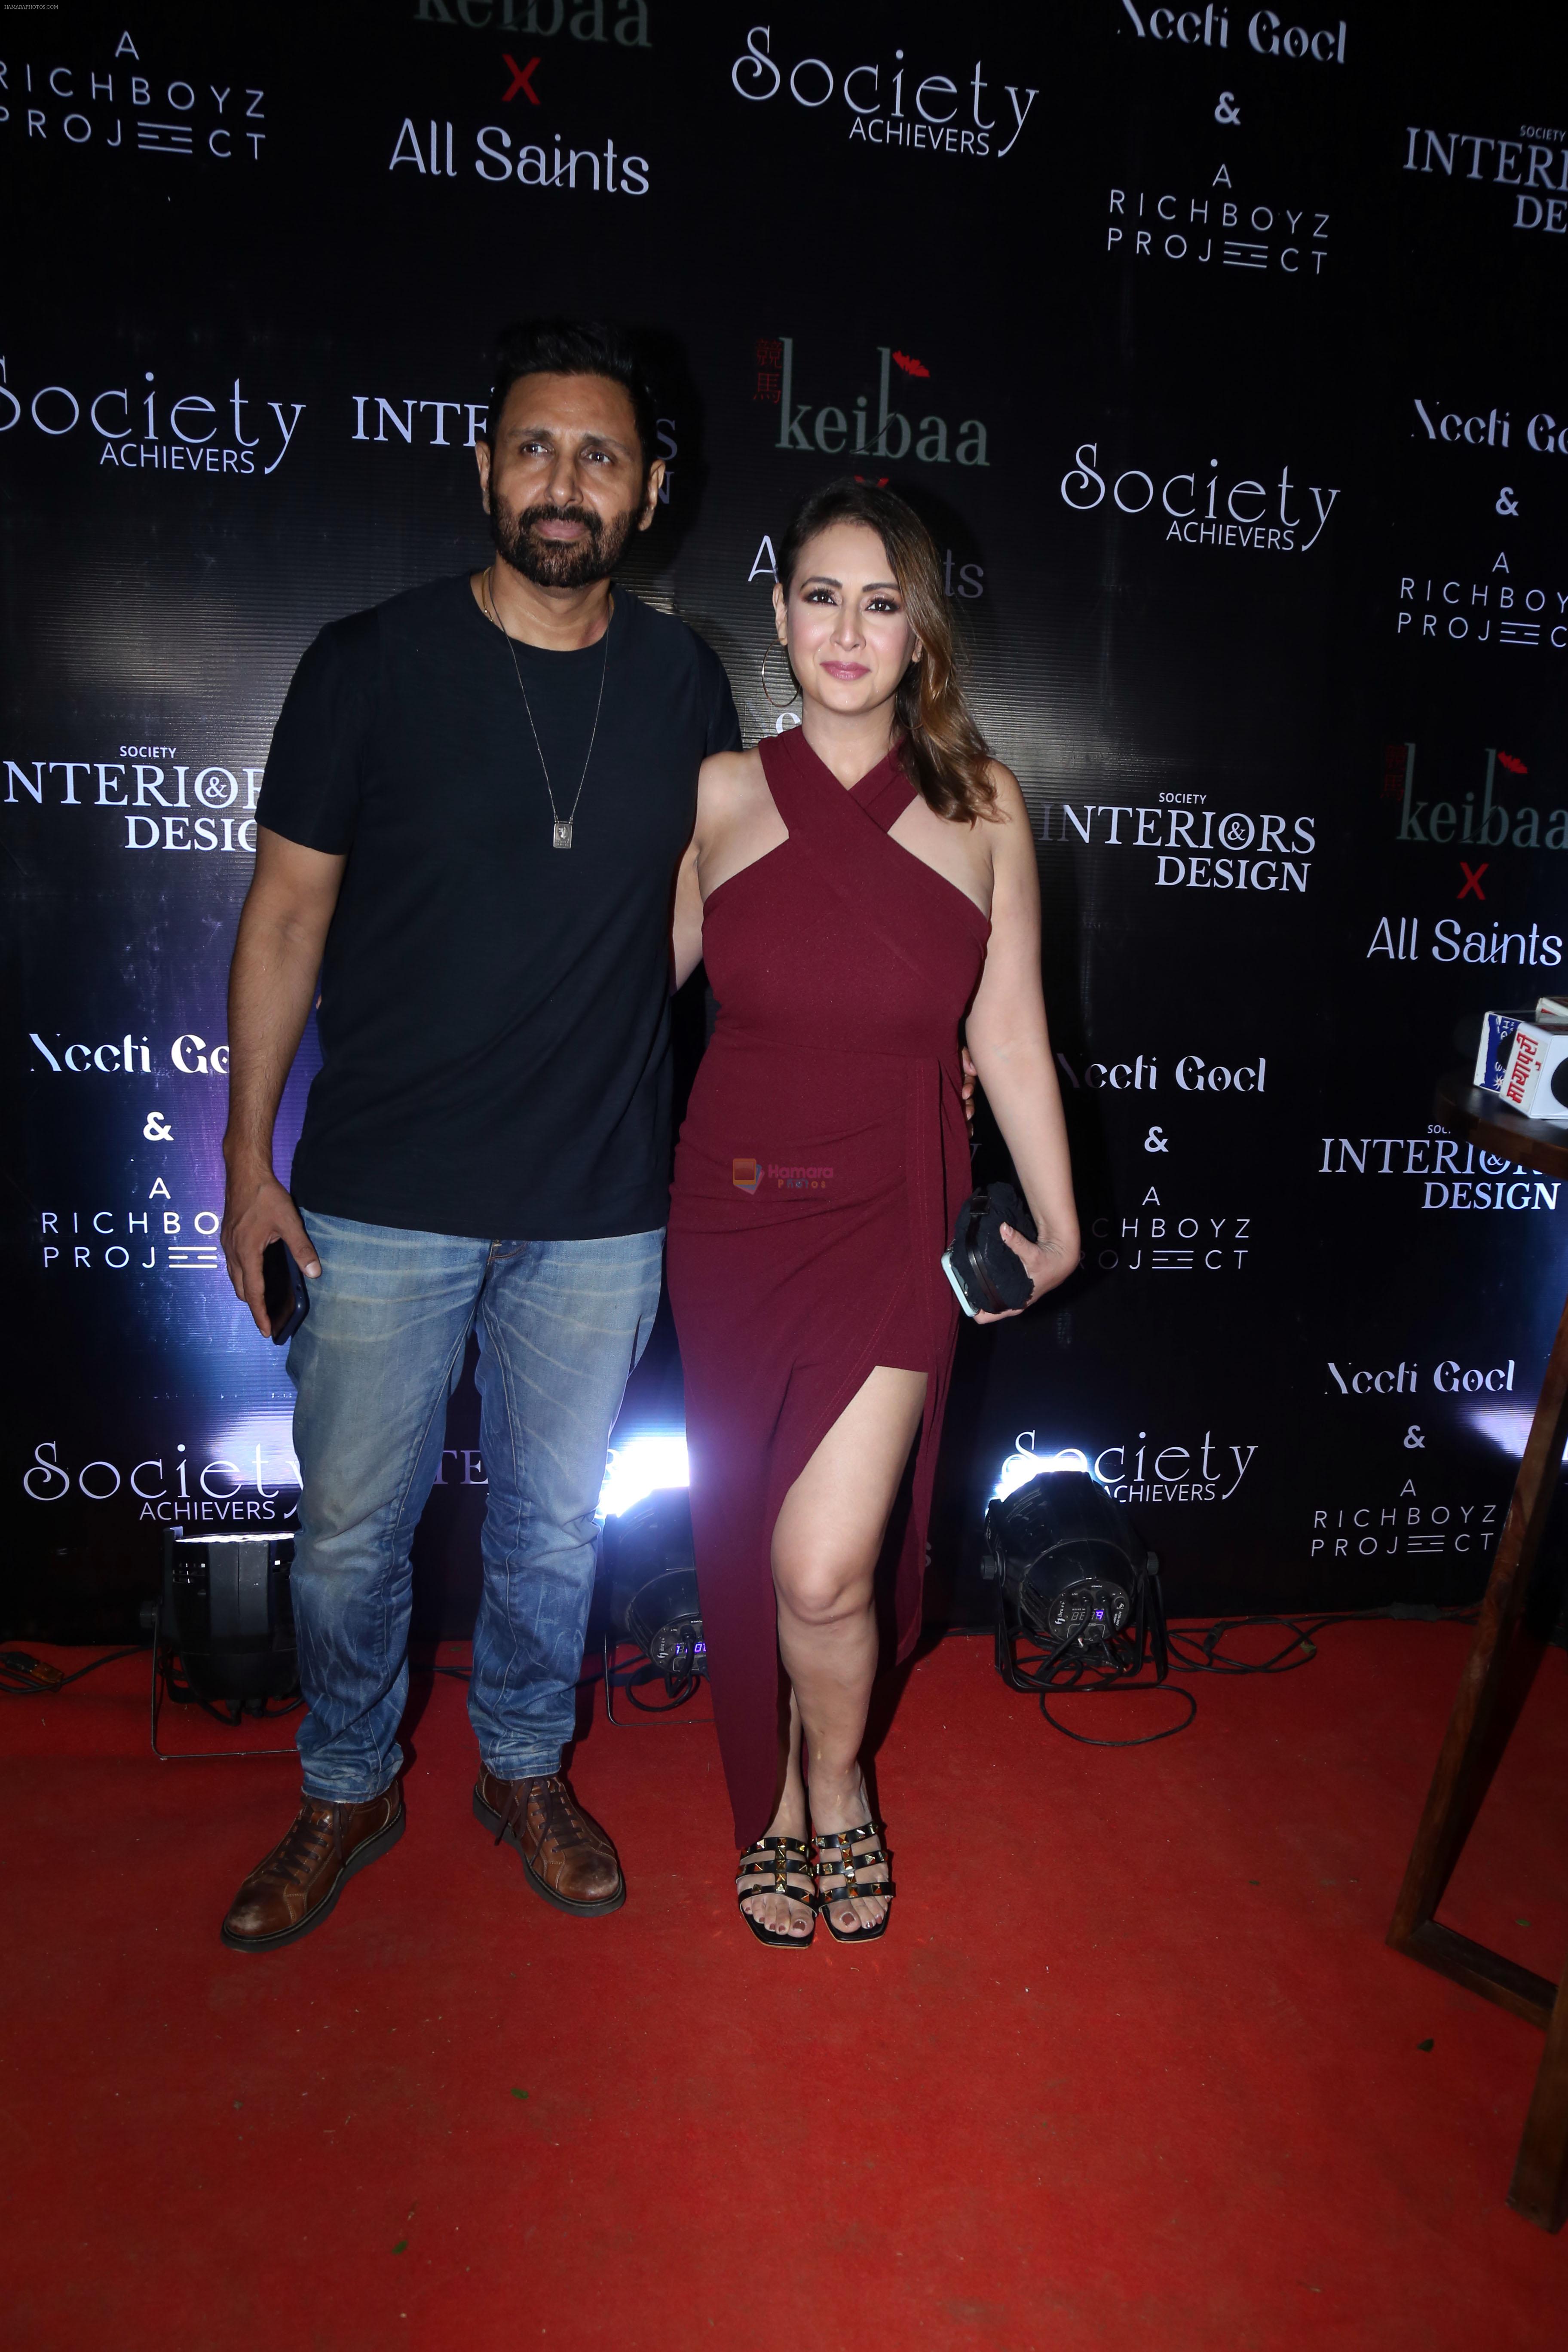 Preeti Jhangiani with spouse Parvin Dabas at the ReOpening of Keibaa X All Saints and Celebration of Society Achievers and Society Interiors and Design Magazine